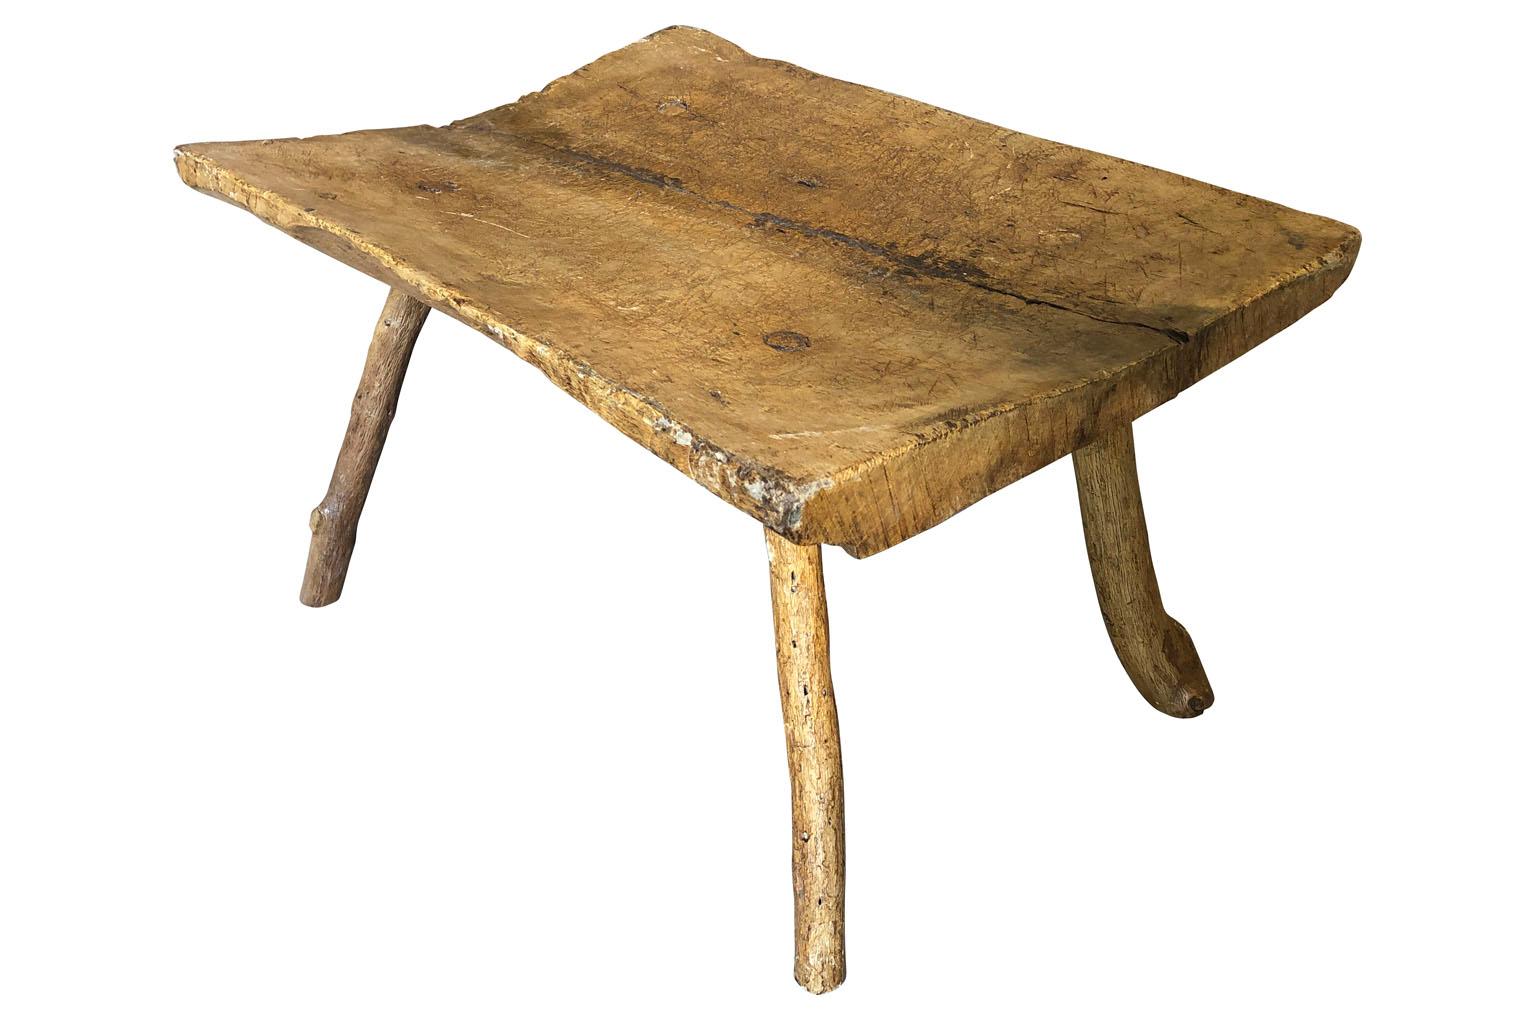 A very charming 18th century Primitive bench - coffee table - wonderfully constructed with a solid board top in naturally washed elm from the Catalan region of Spain. Wonderful for any casual interior or exterior.